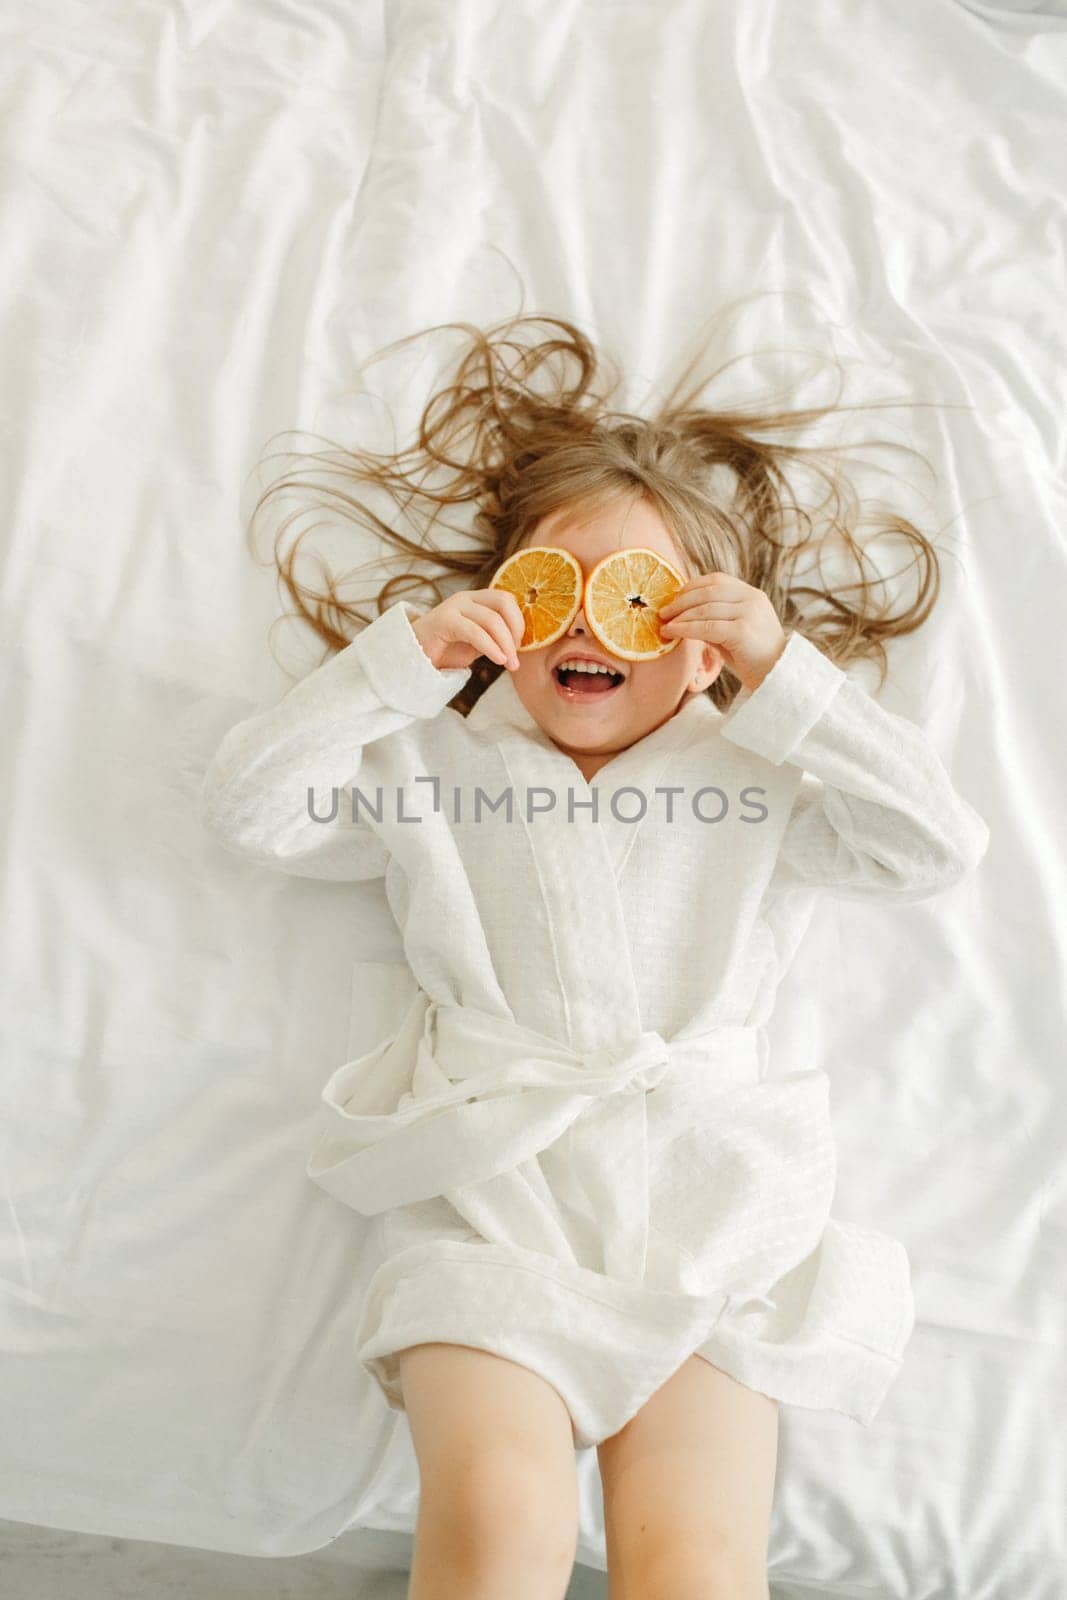 A young girl in a white coat, lying in bed, playing with candied oranges, closed her eyes with them.